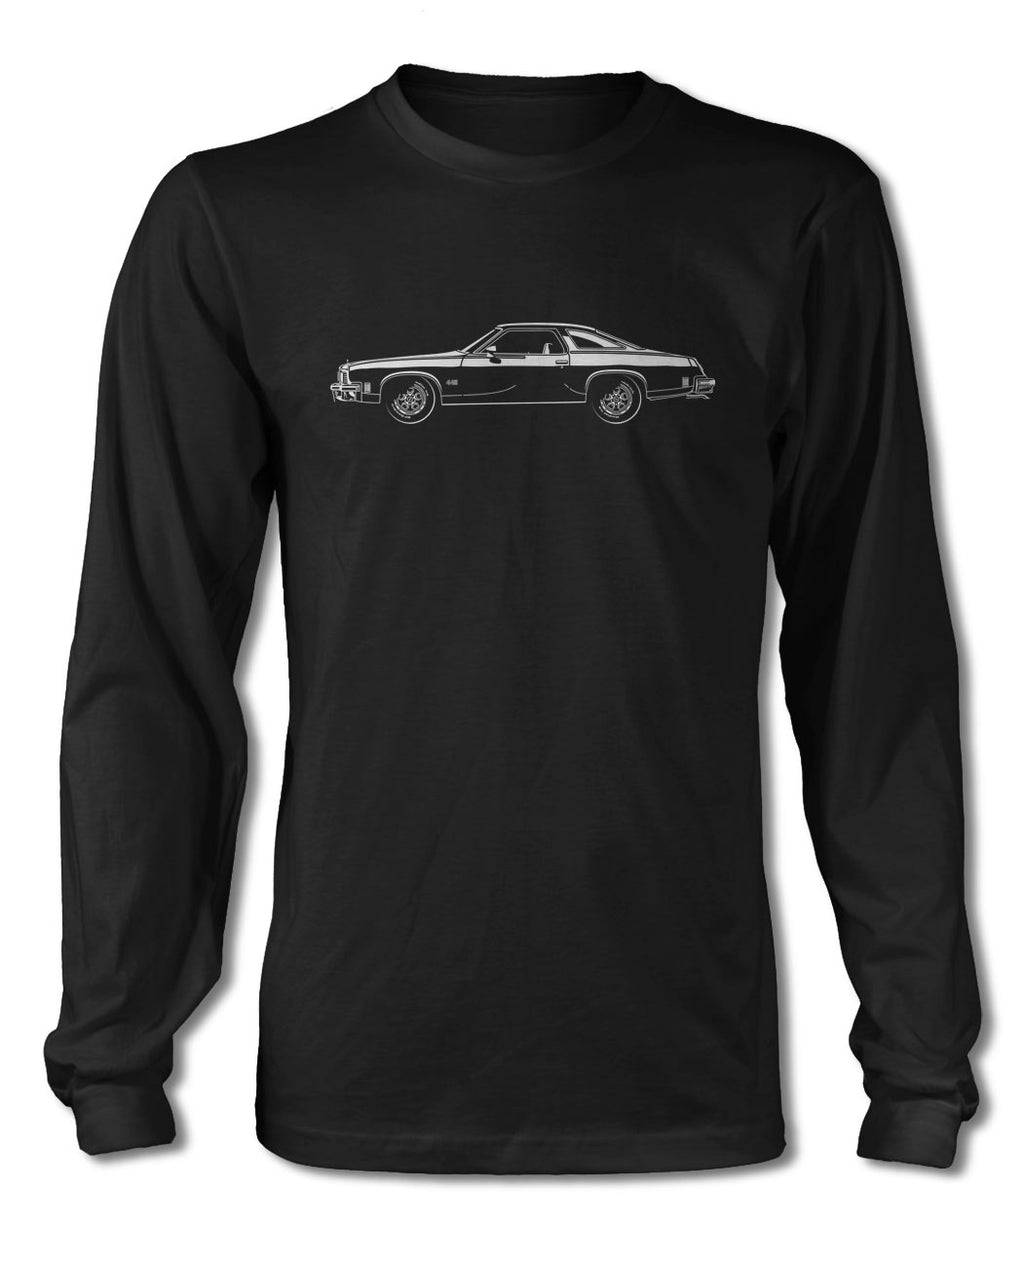 1974 Oldsmobile Cutlass 4-4-2 Coupe T-Shirt - Long Sleeves - Side View